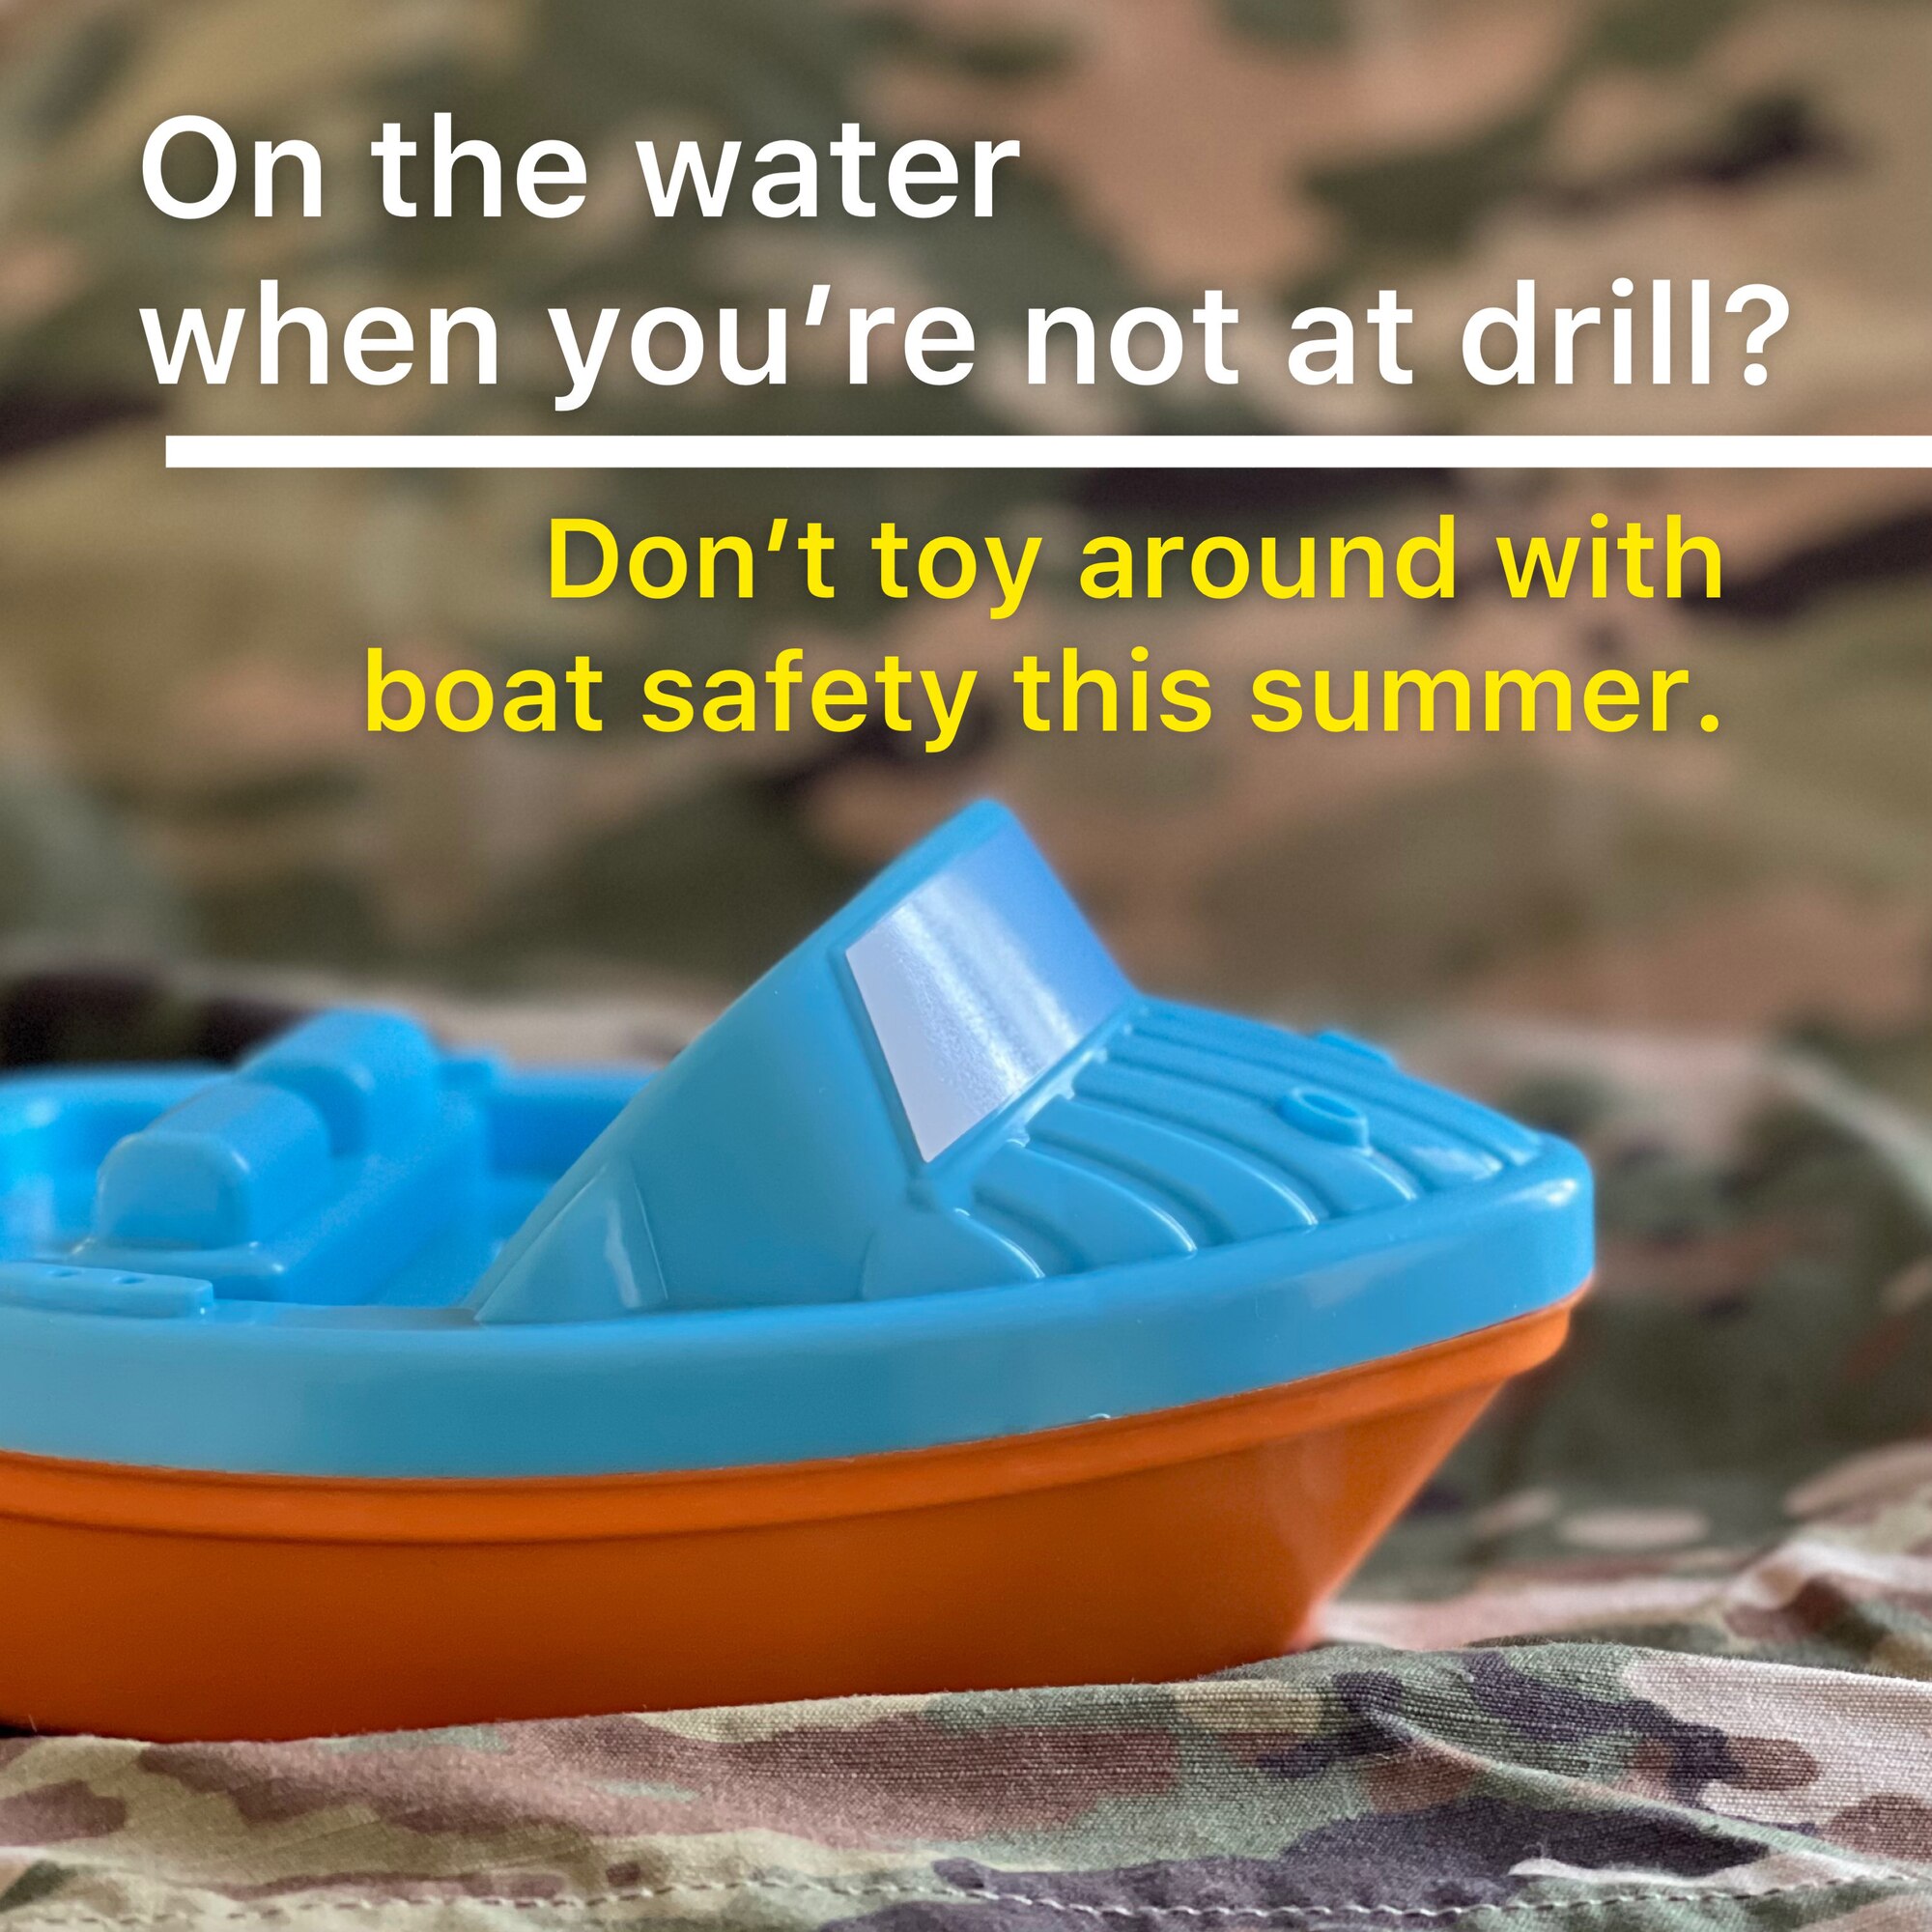 Don't toy around with boater safety this summer. (U.S. Air National Guard Illustration/Infographic by Master Sgt. Lynette Hoke)